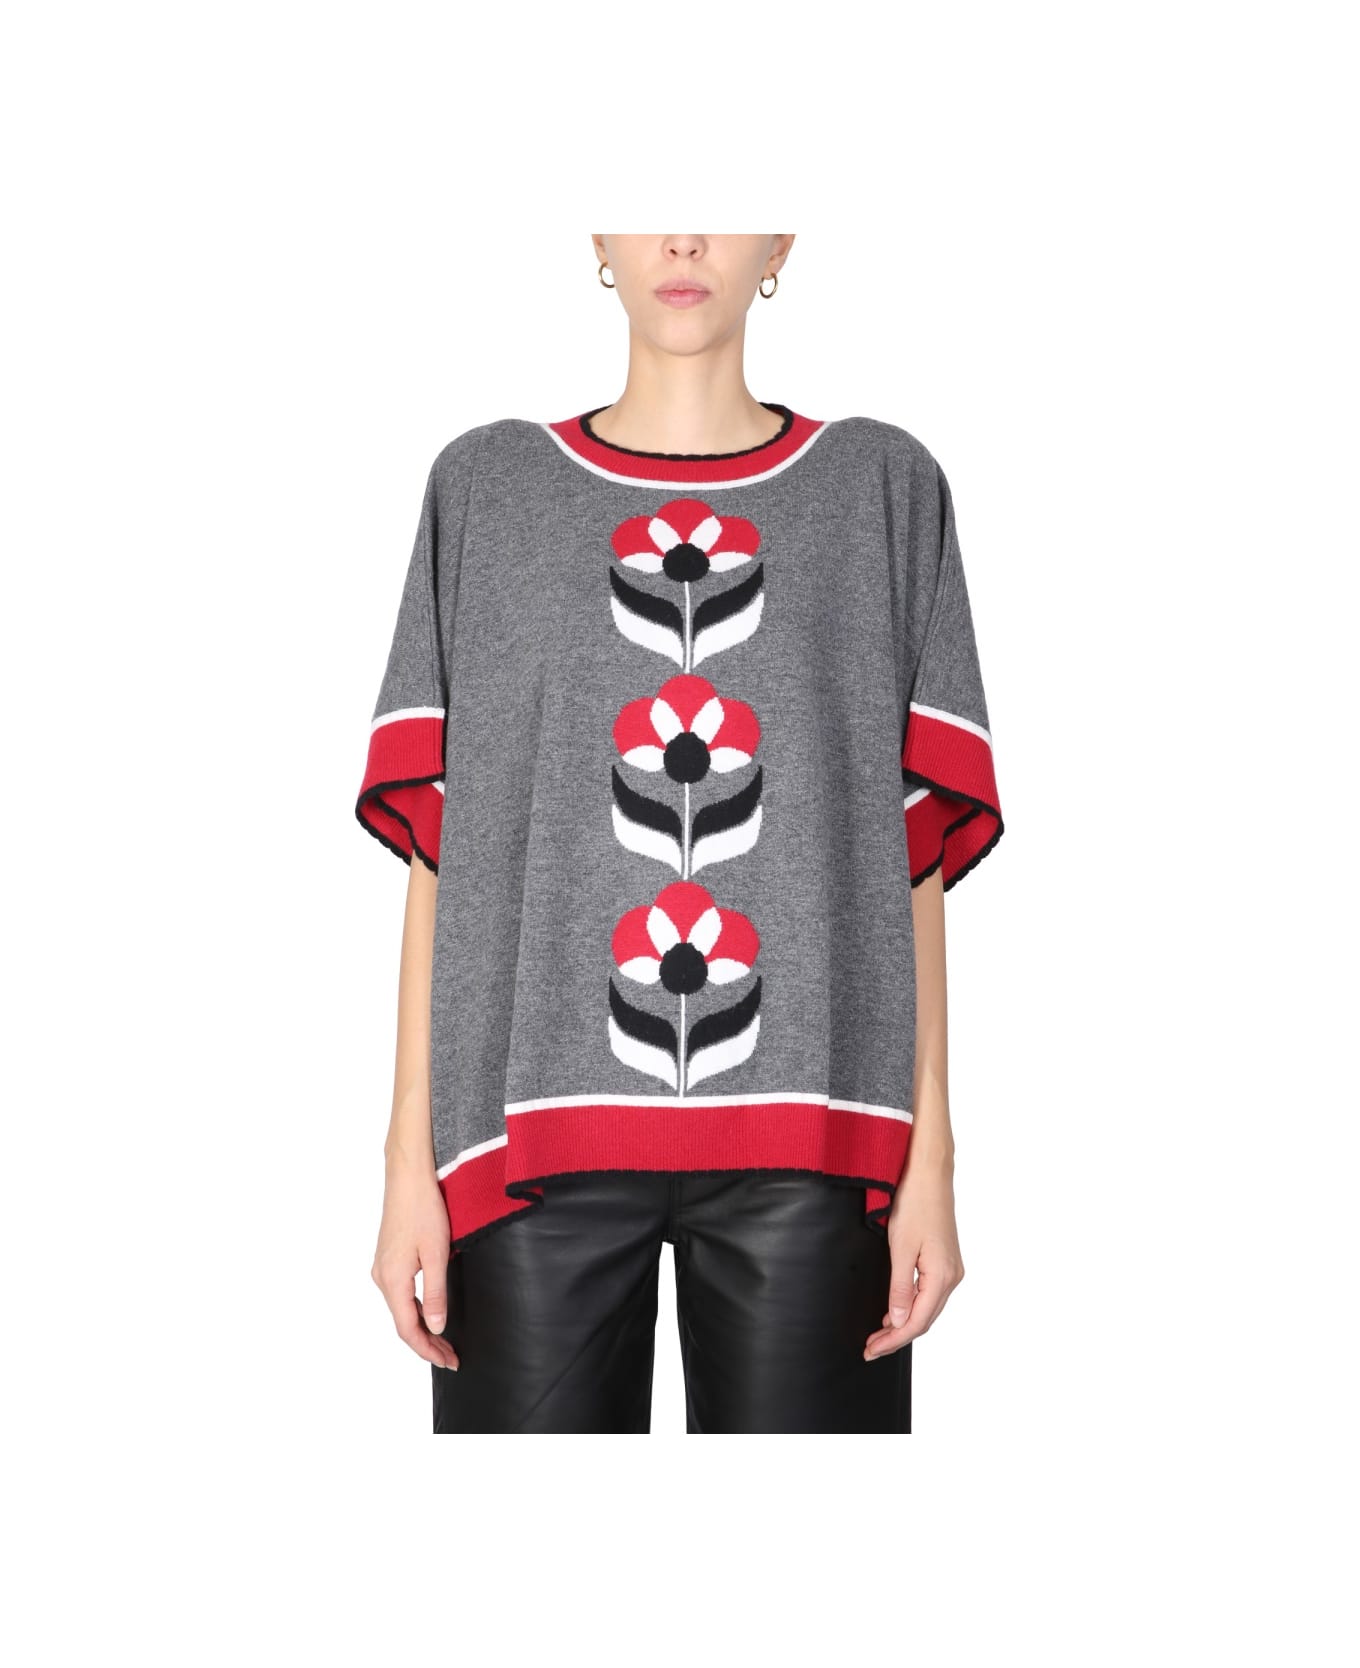 Boutique Moschino Wool Jersey. - GREY